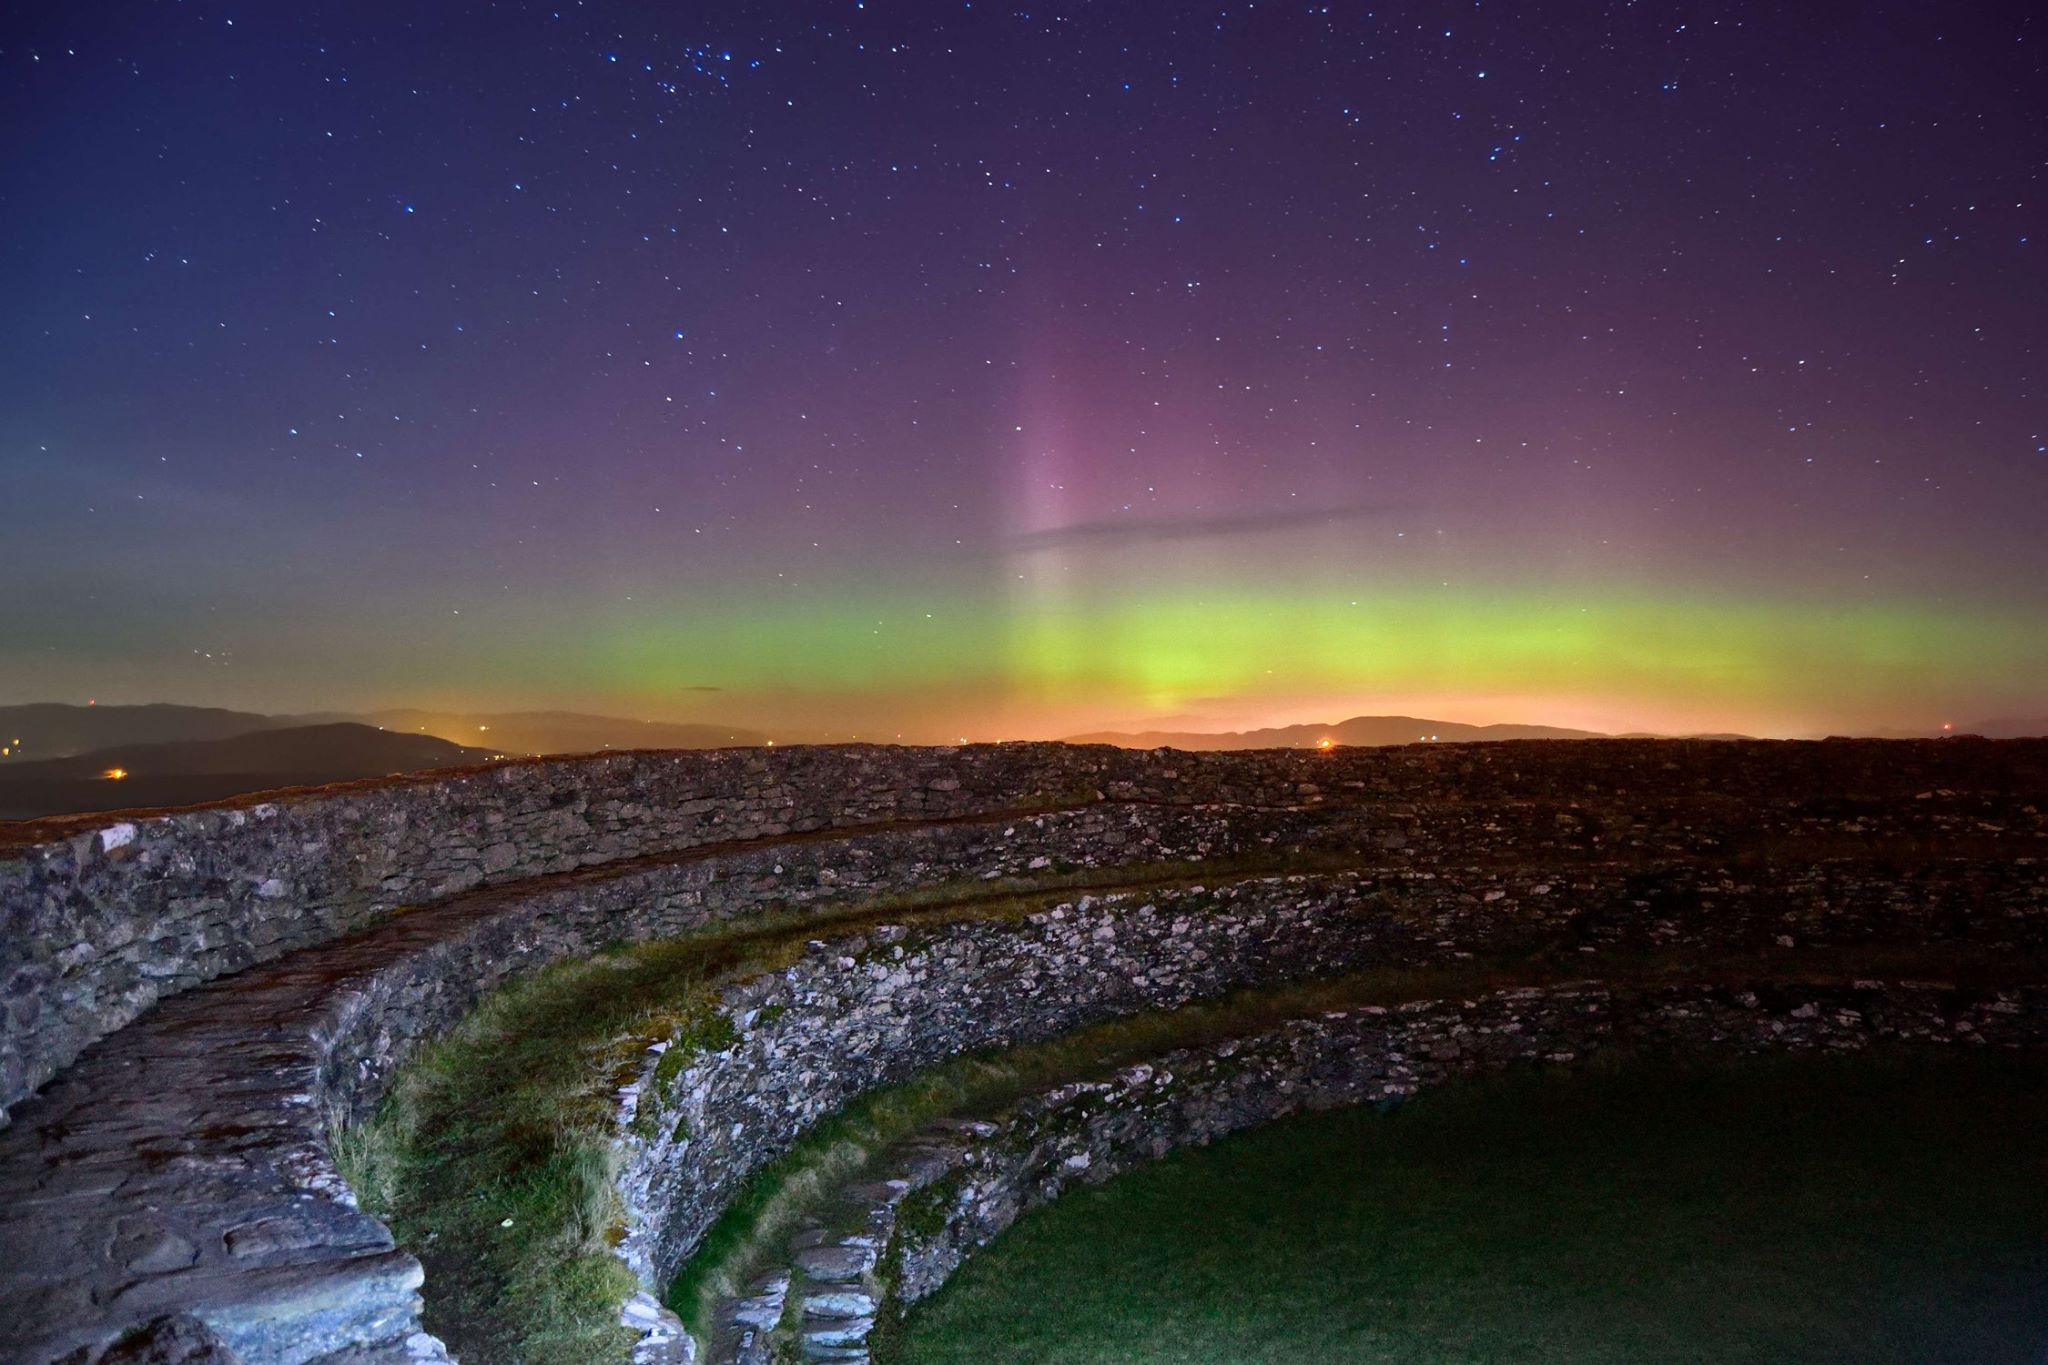 The Northern Lights from Grianan an Aileach, Burt, County Donegal